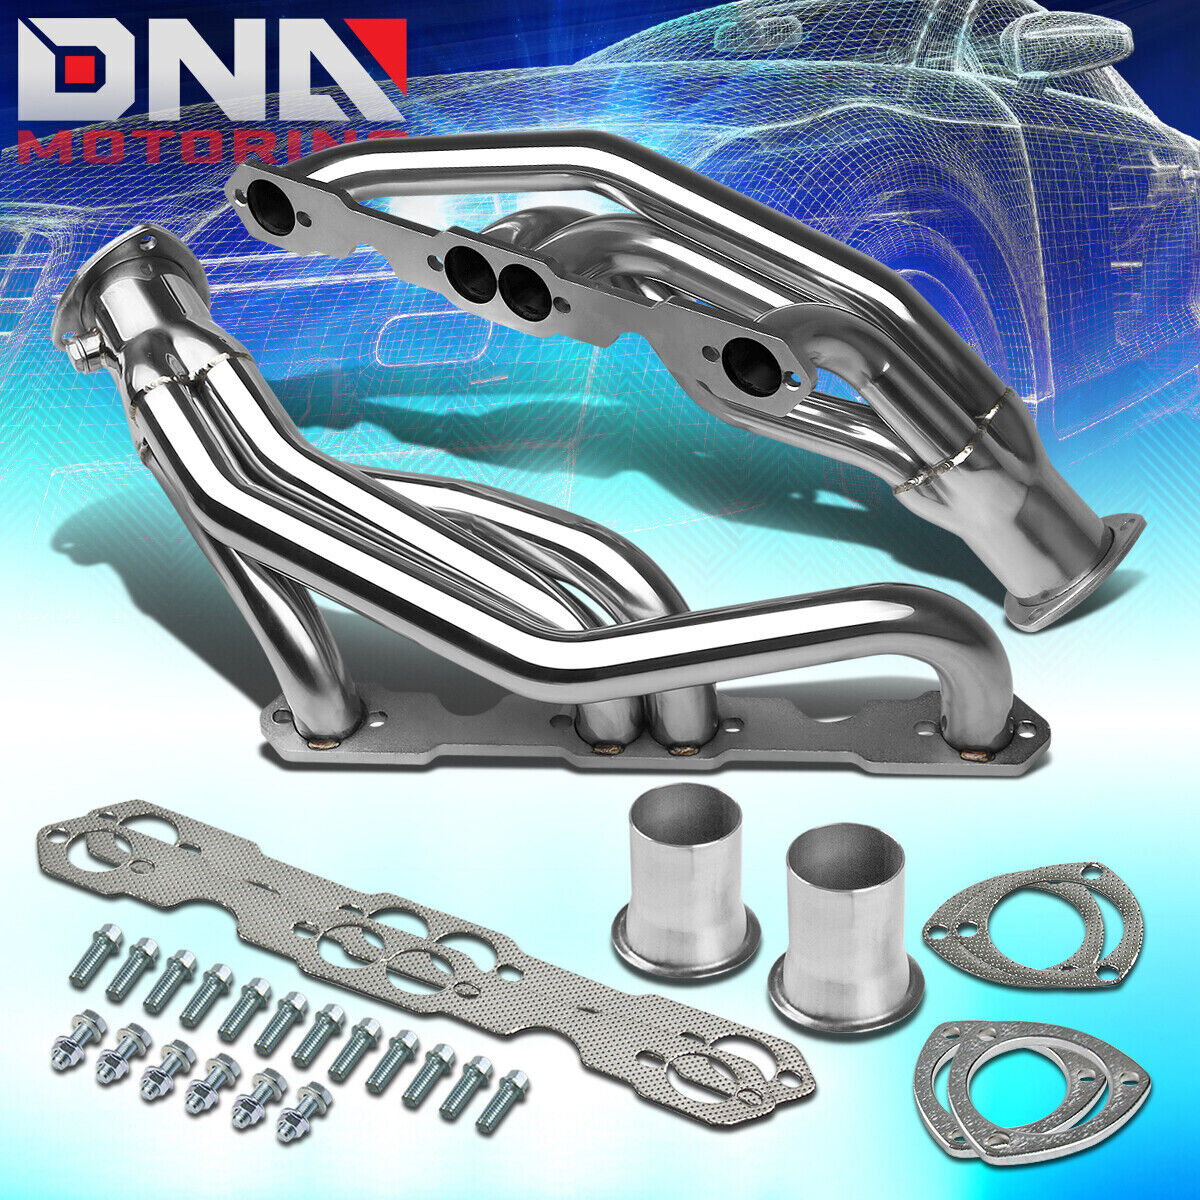 STAINLESS STEEL HEADER FOR 88-97 C/K-SERIES 1500-2500 5.0/5.7 EXHAUST/MANIFOLD